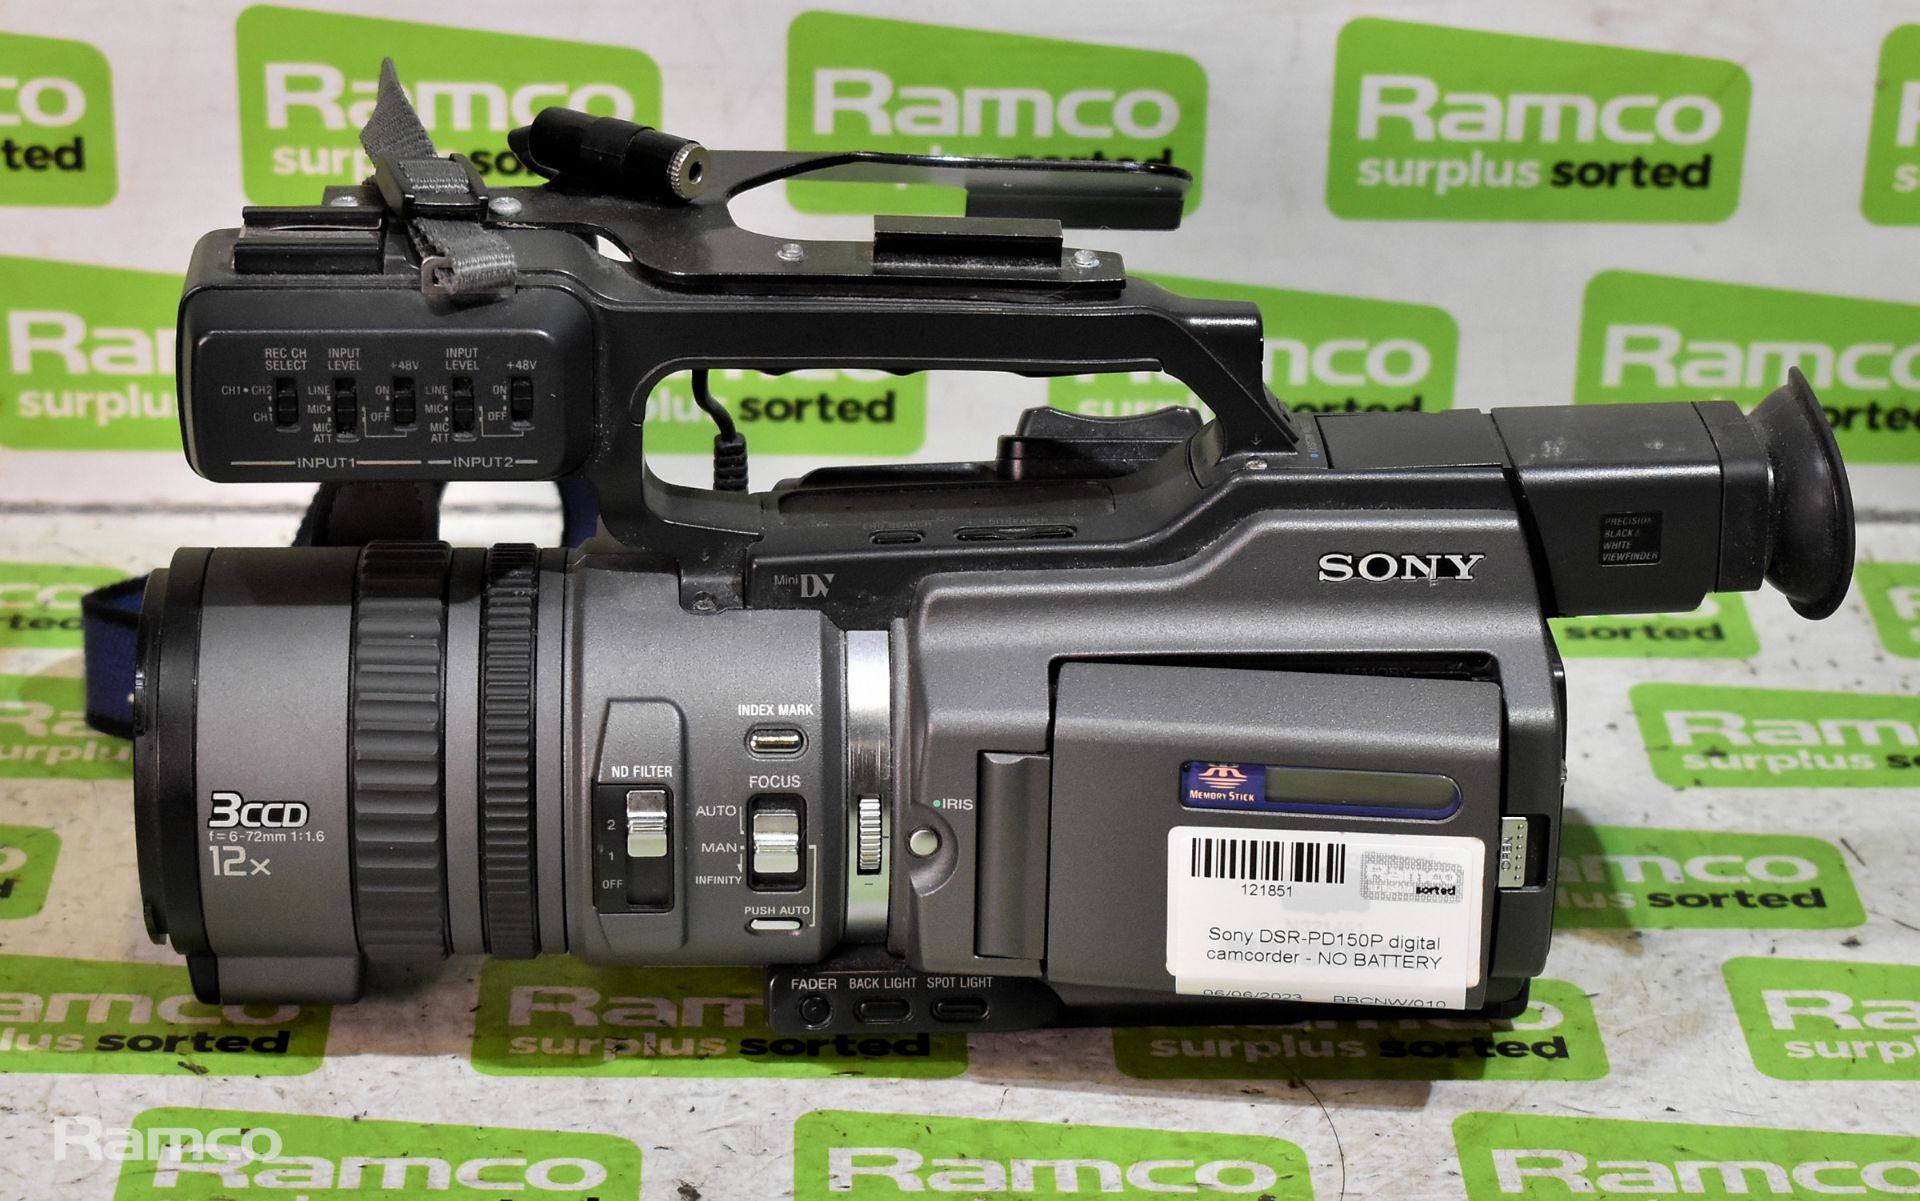 Sony DSR-PD150P digital camcorder - NO BATTERY